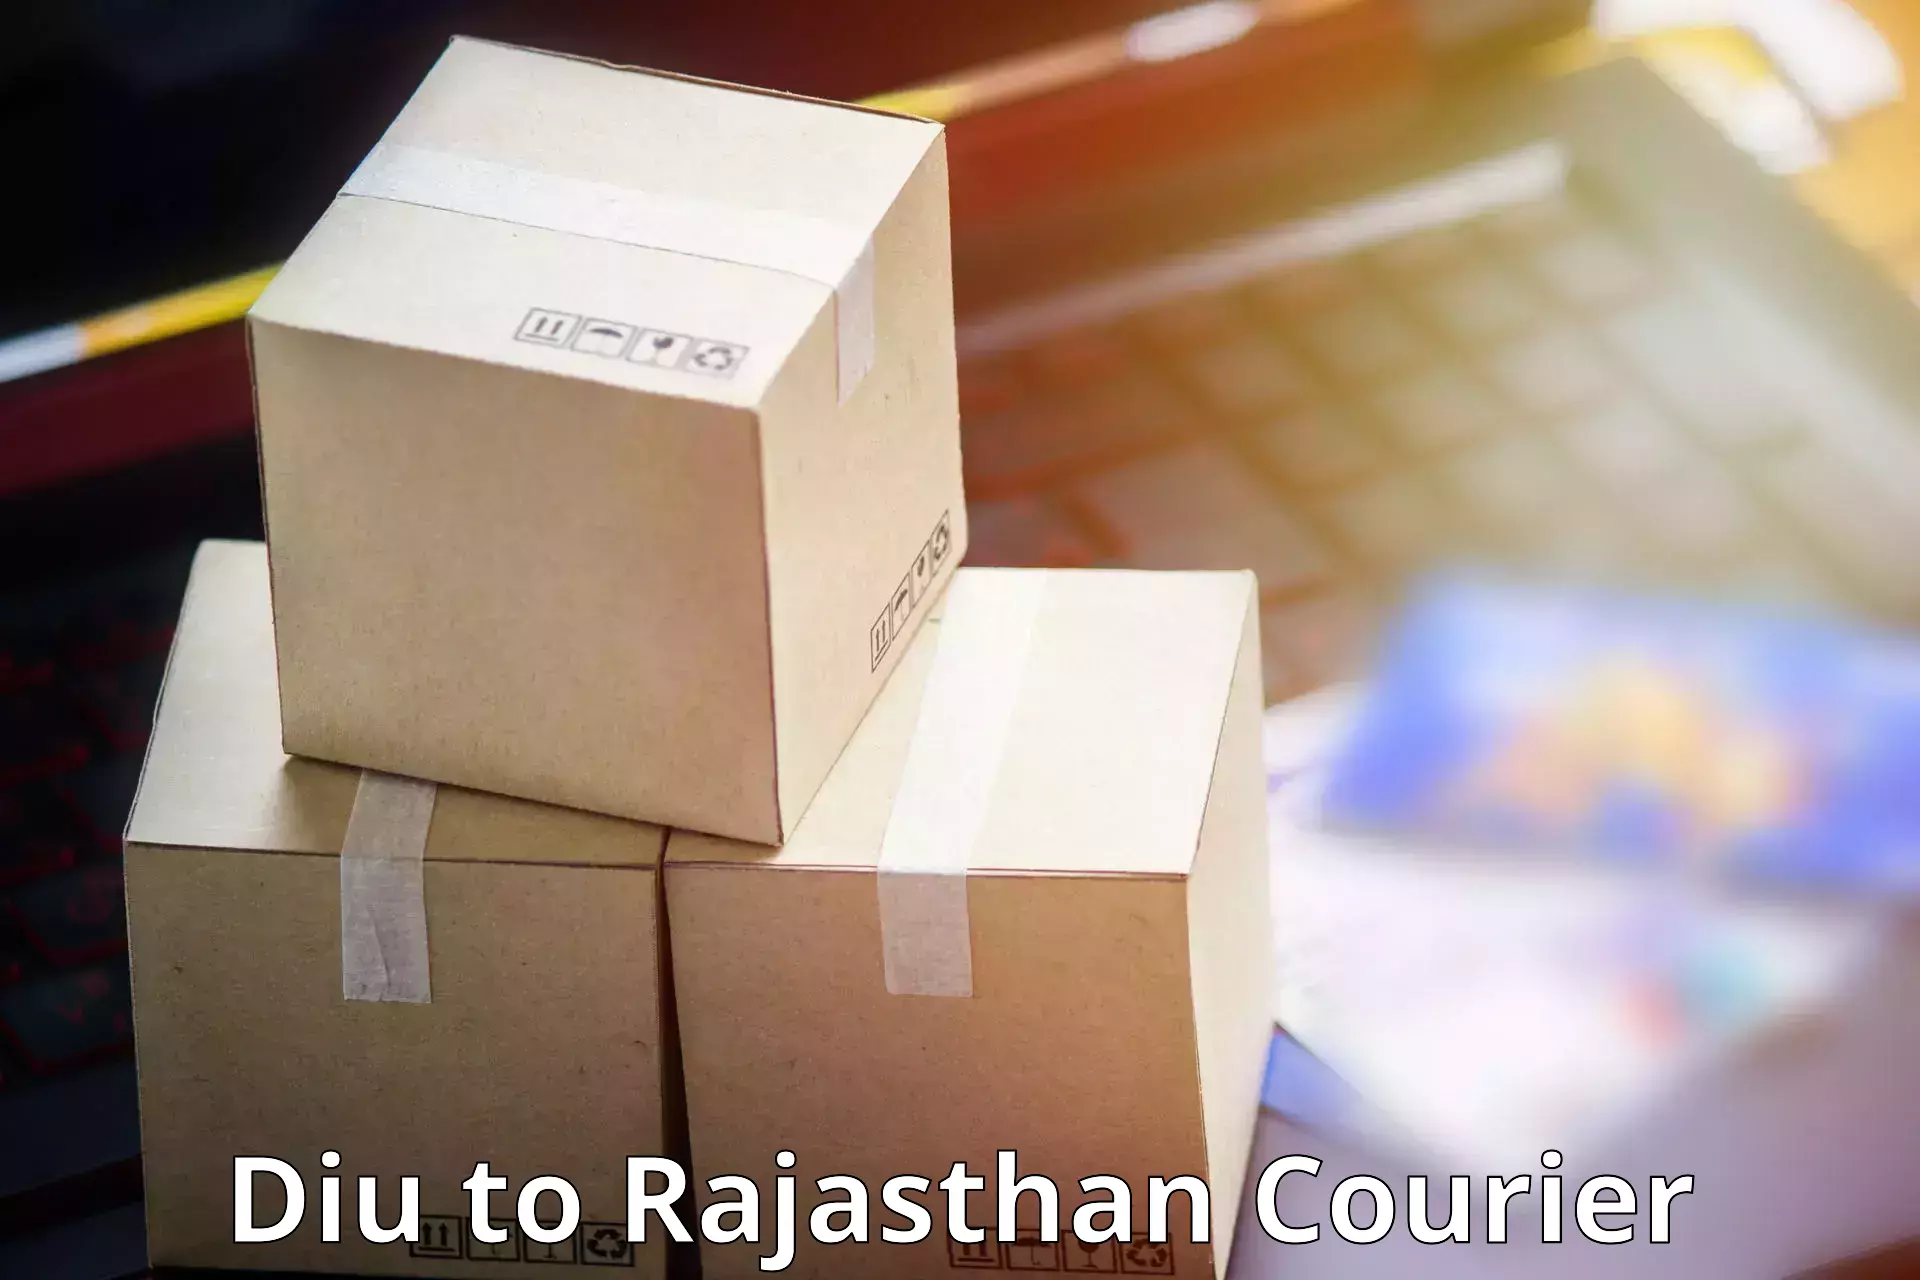 Efficient parcel tracking Diu to Udaipur